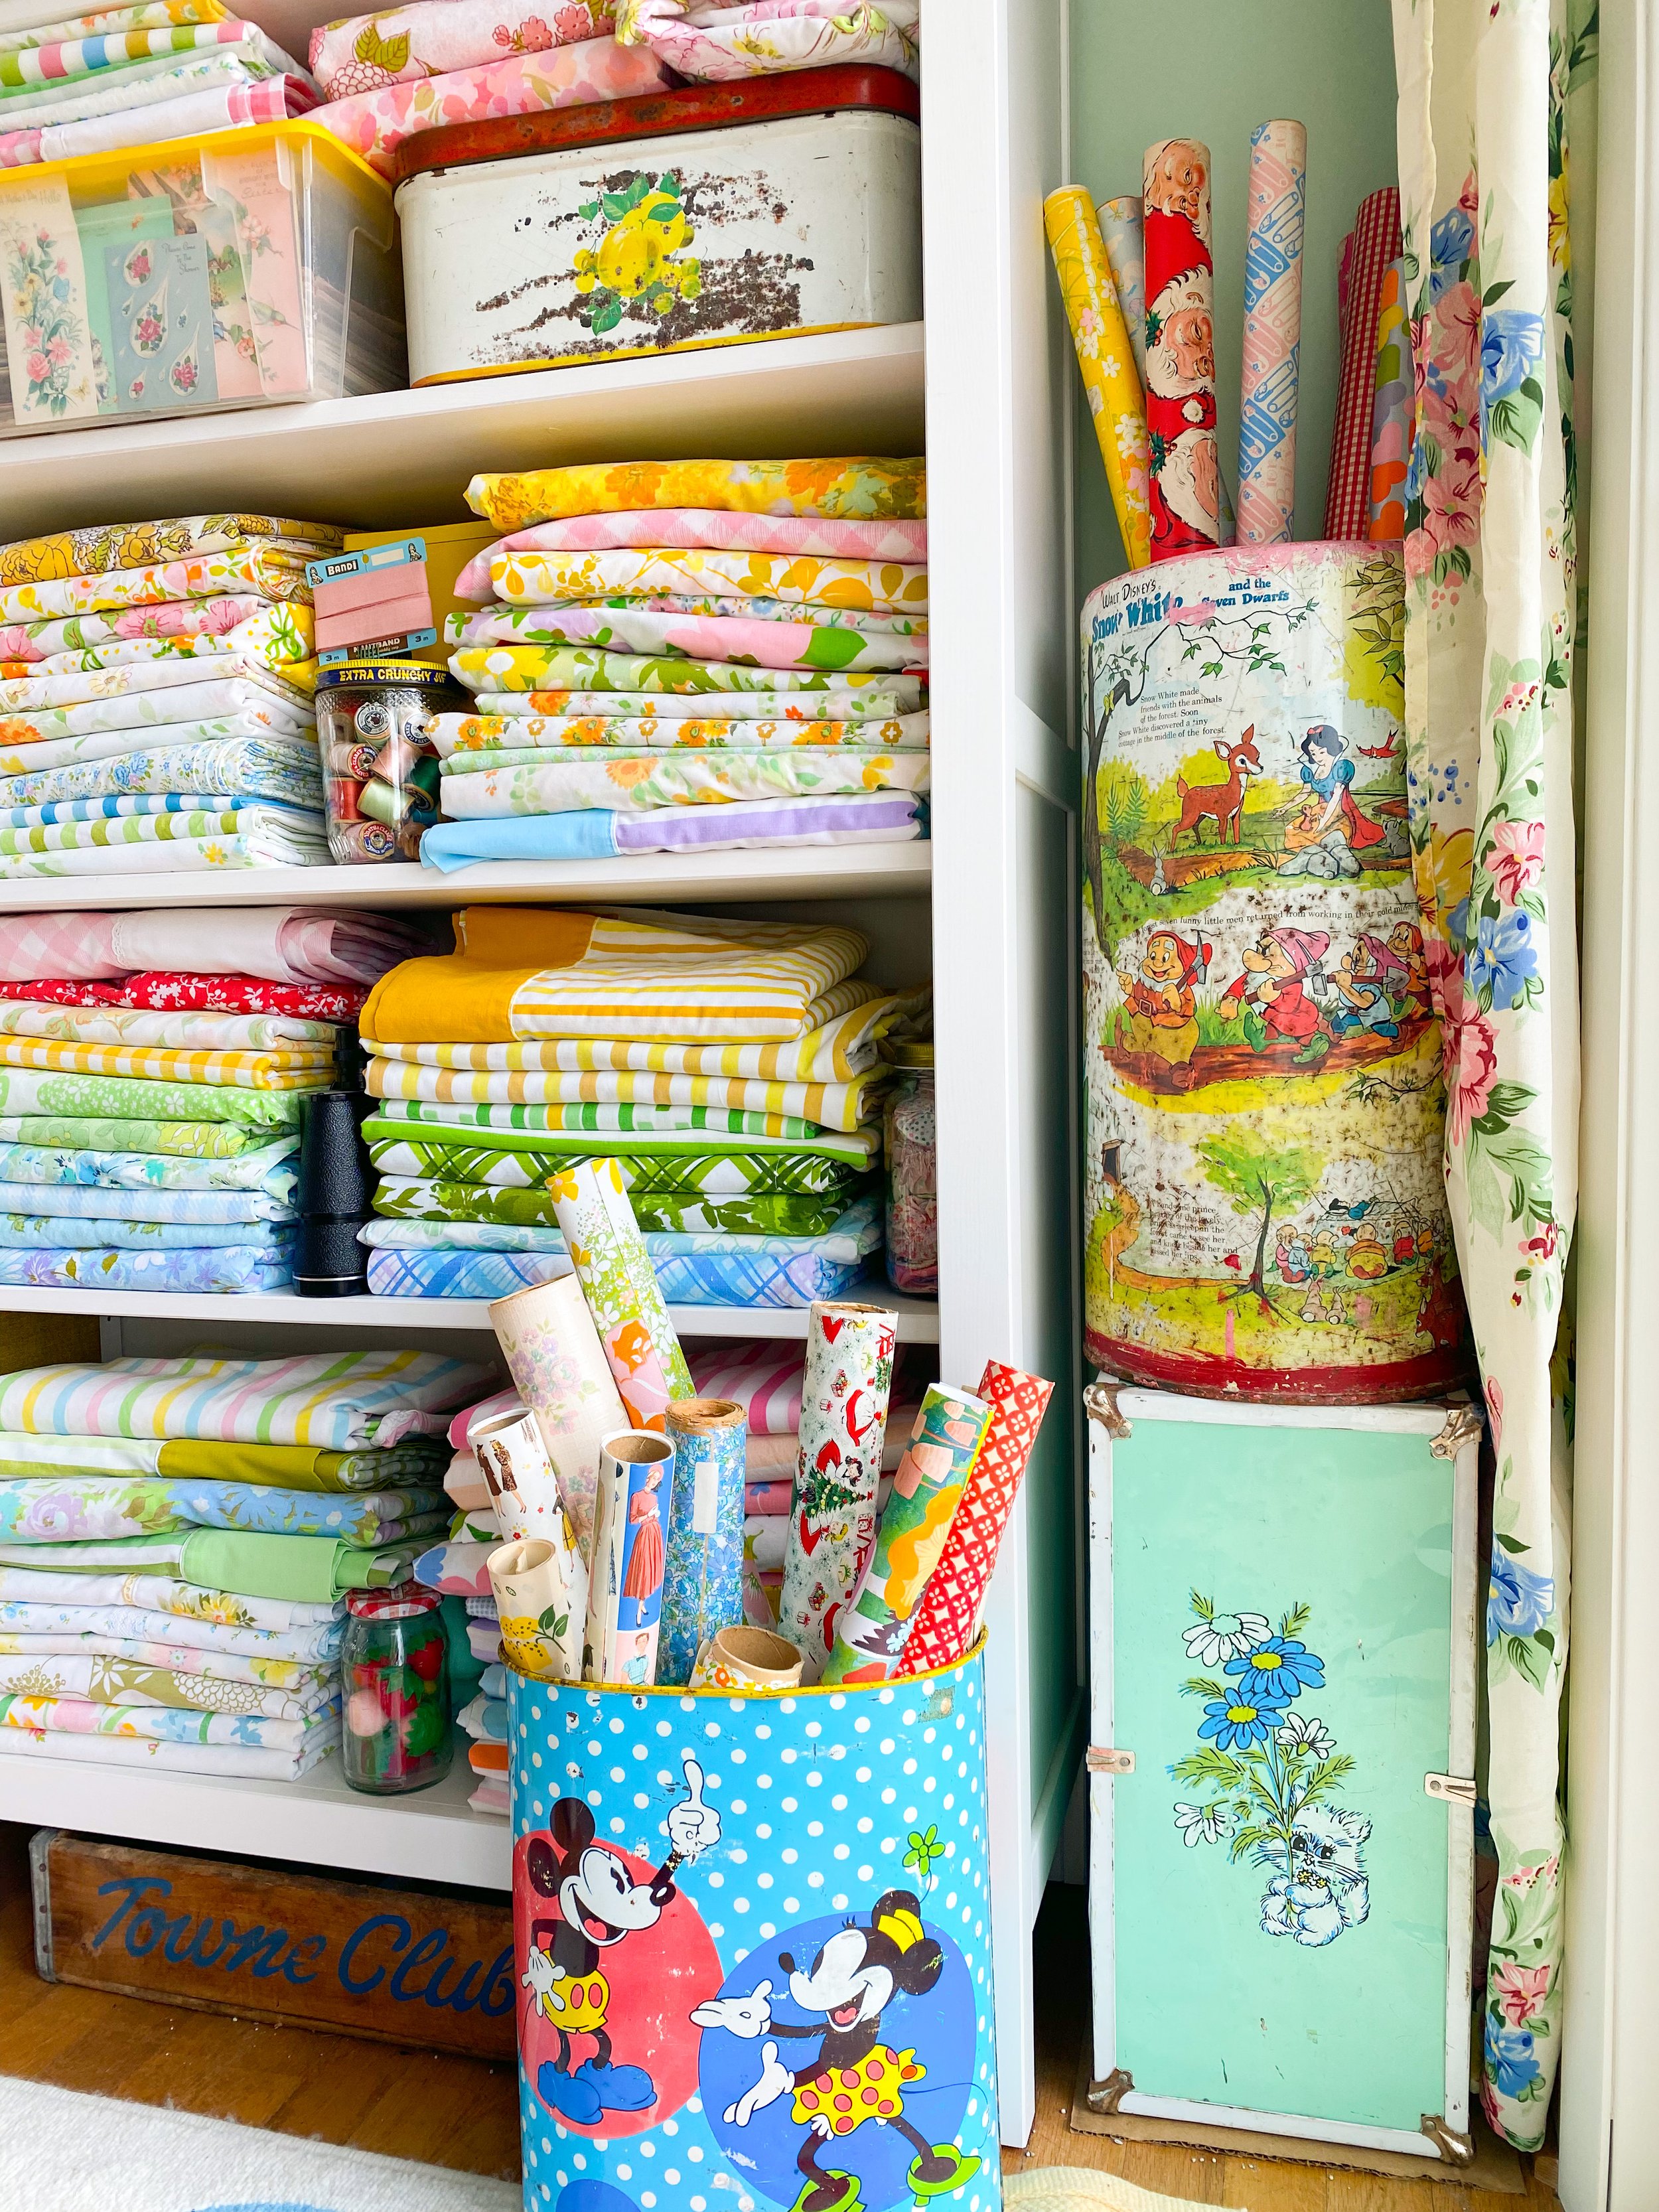 9 Vintage Items To Use & Repurpose As Storage For Home